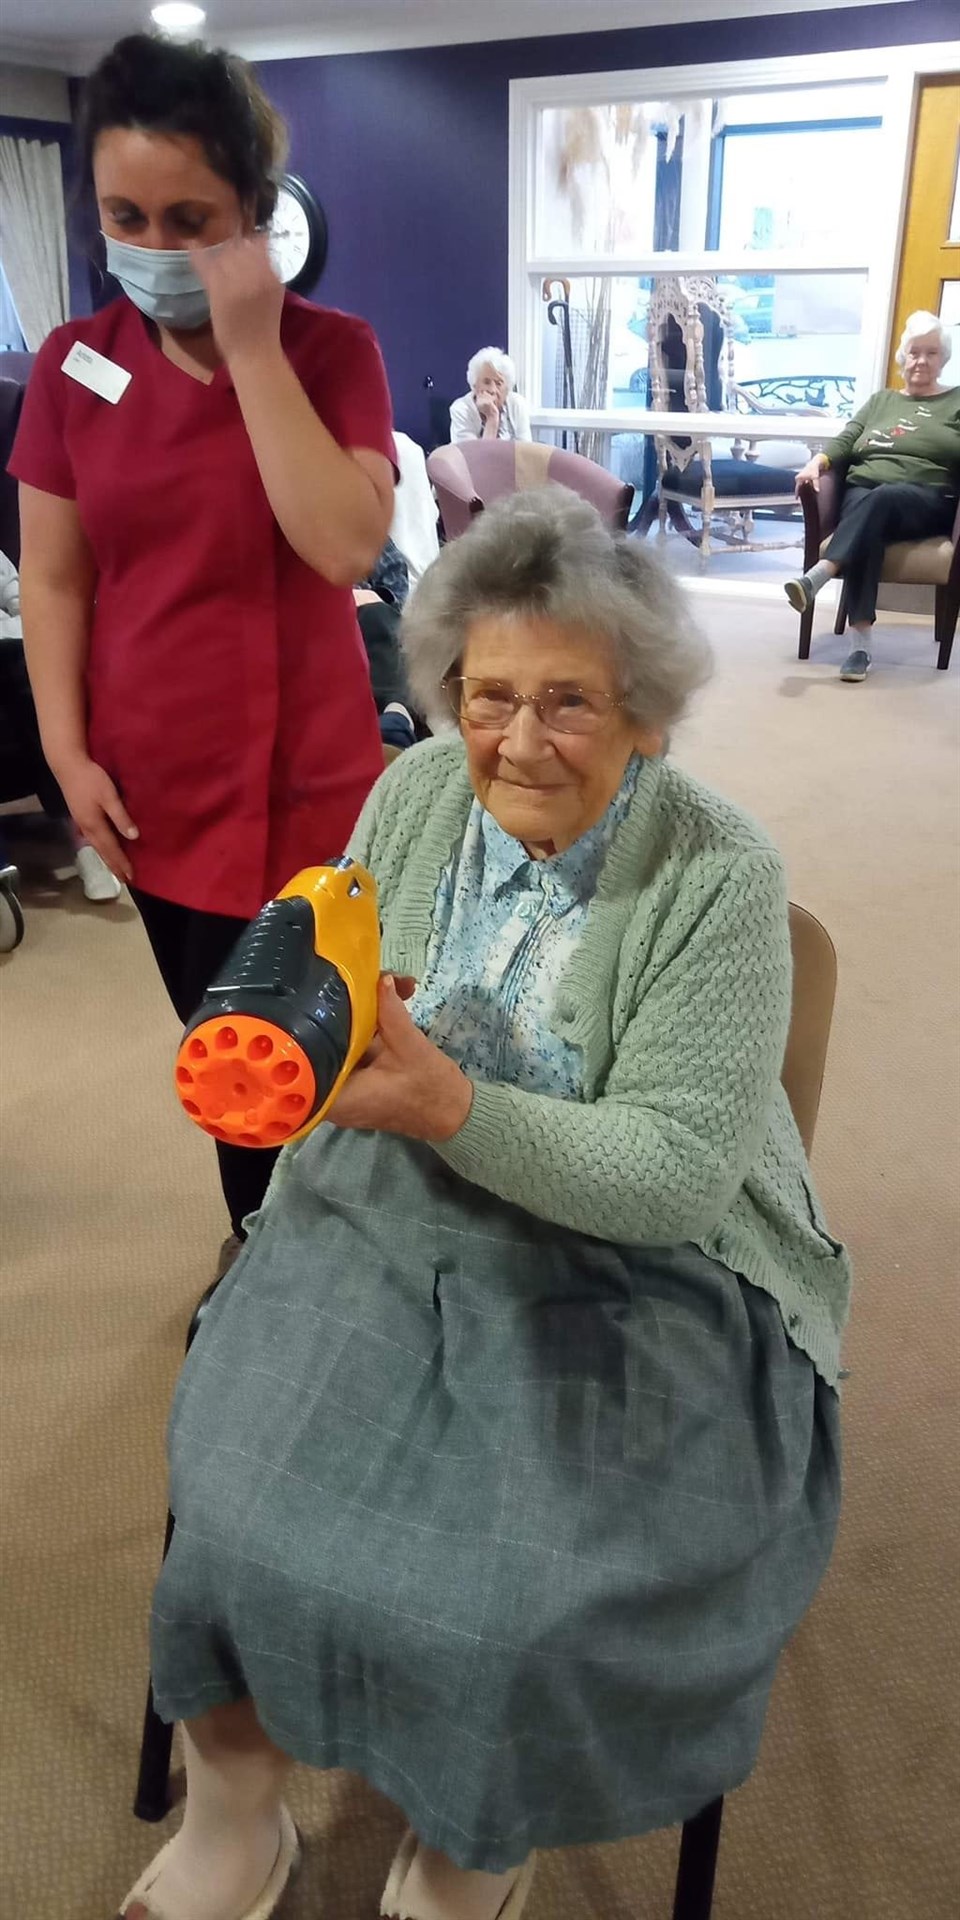 Residents relished the chance to try out the toys.